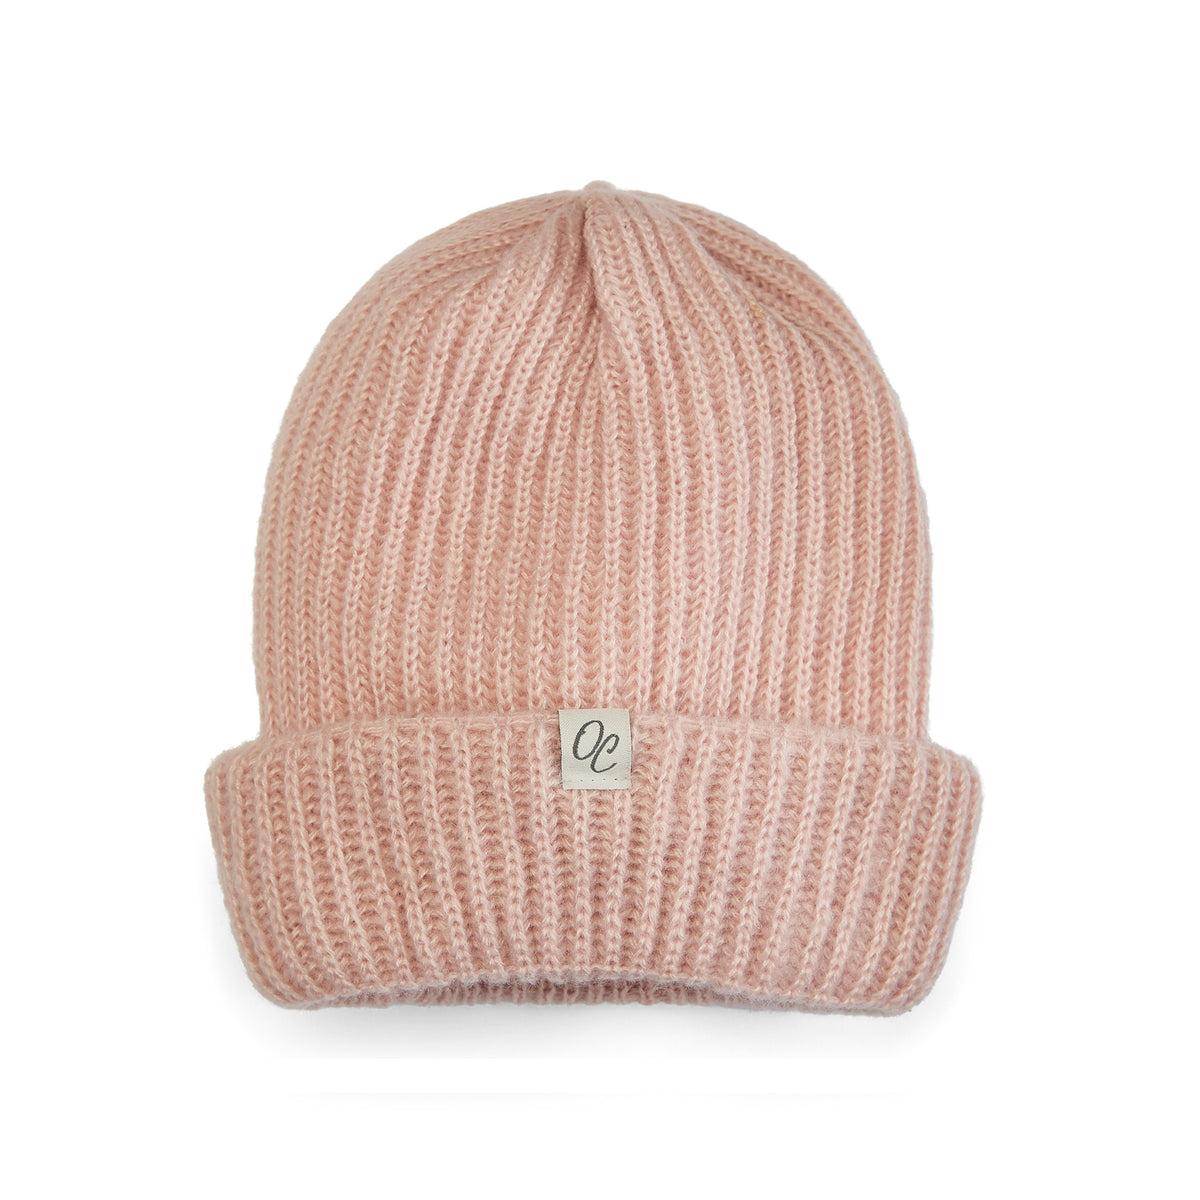 Only Curls Satin Lined Knitted Pink Beanie Hat